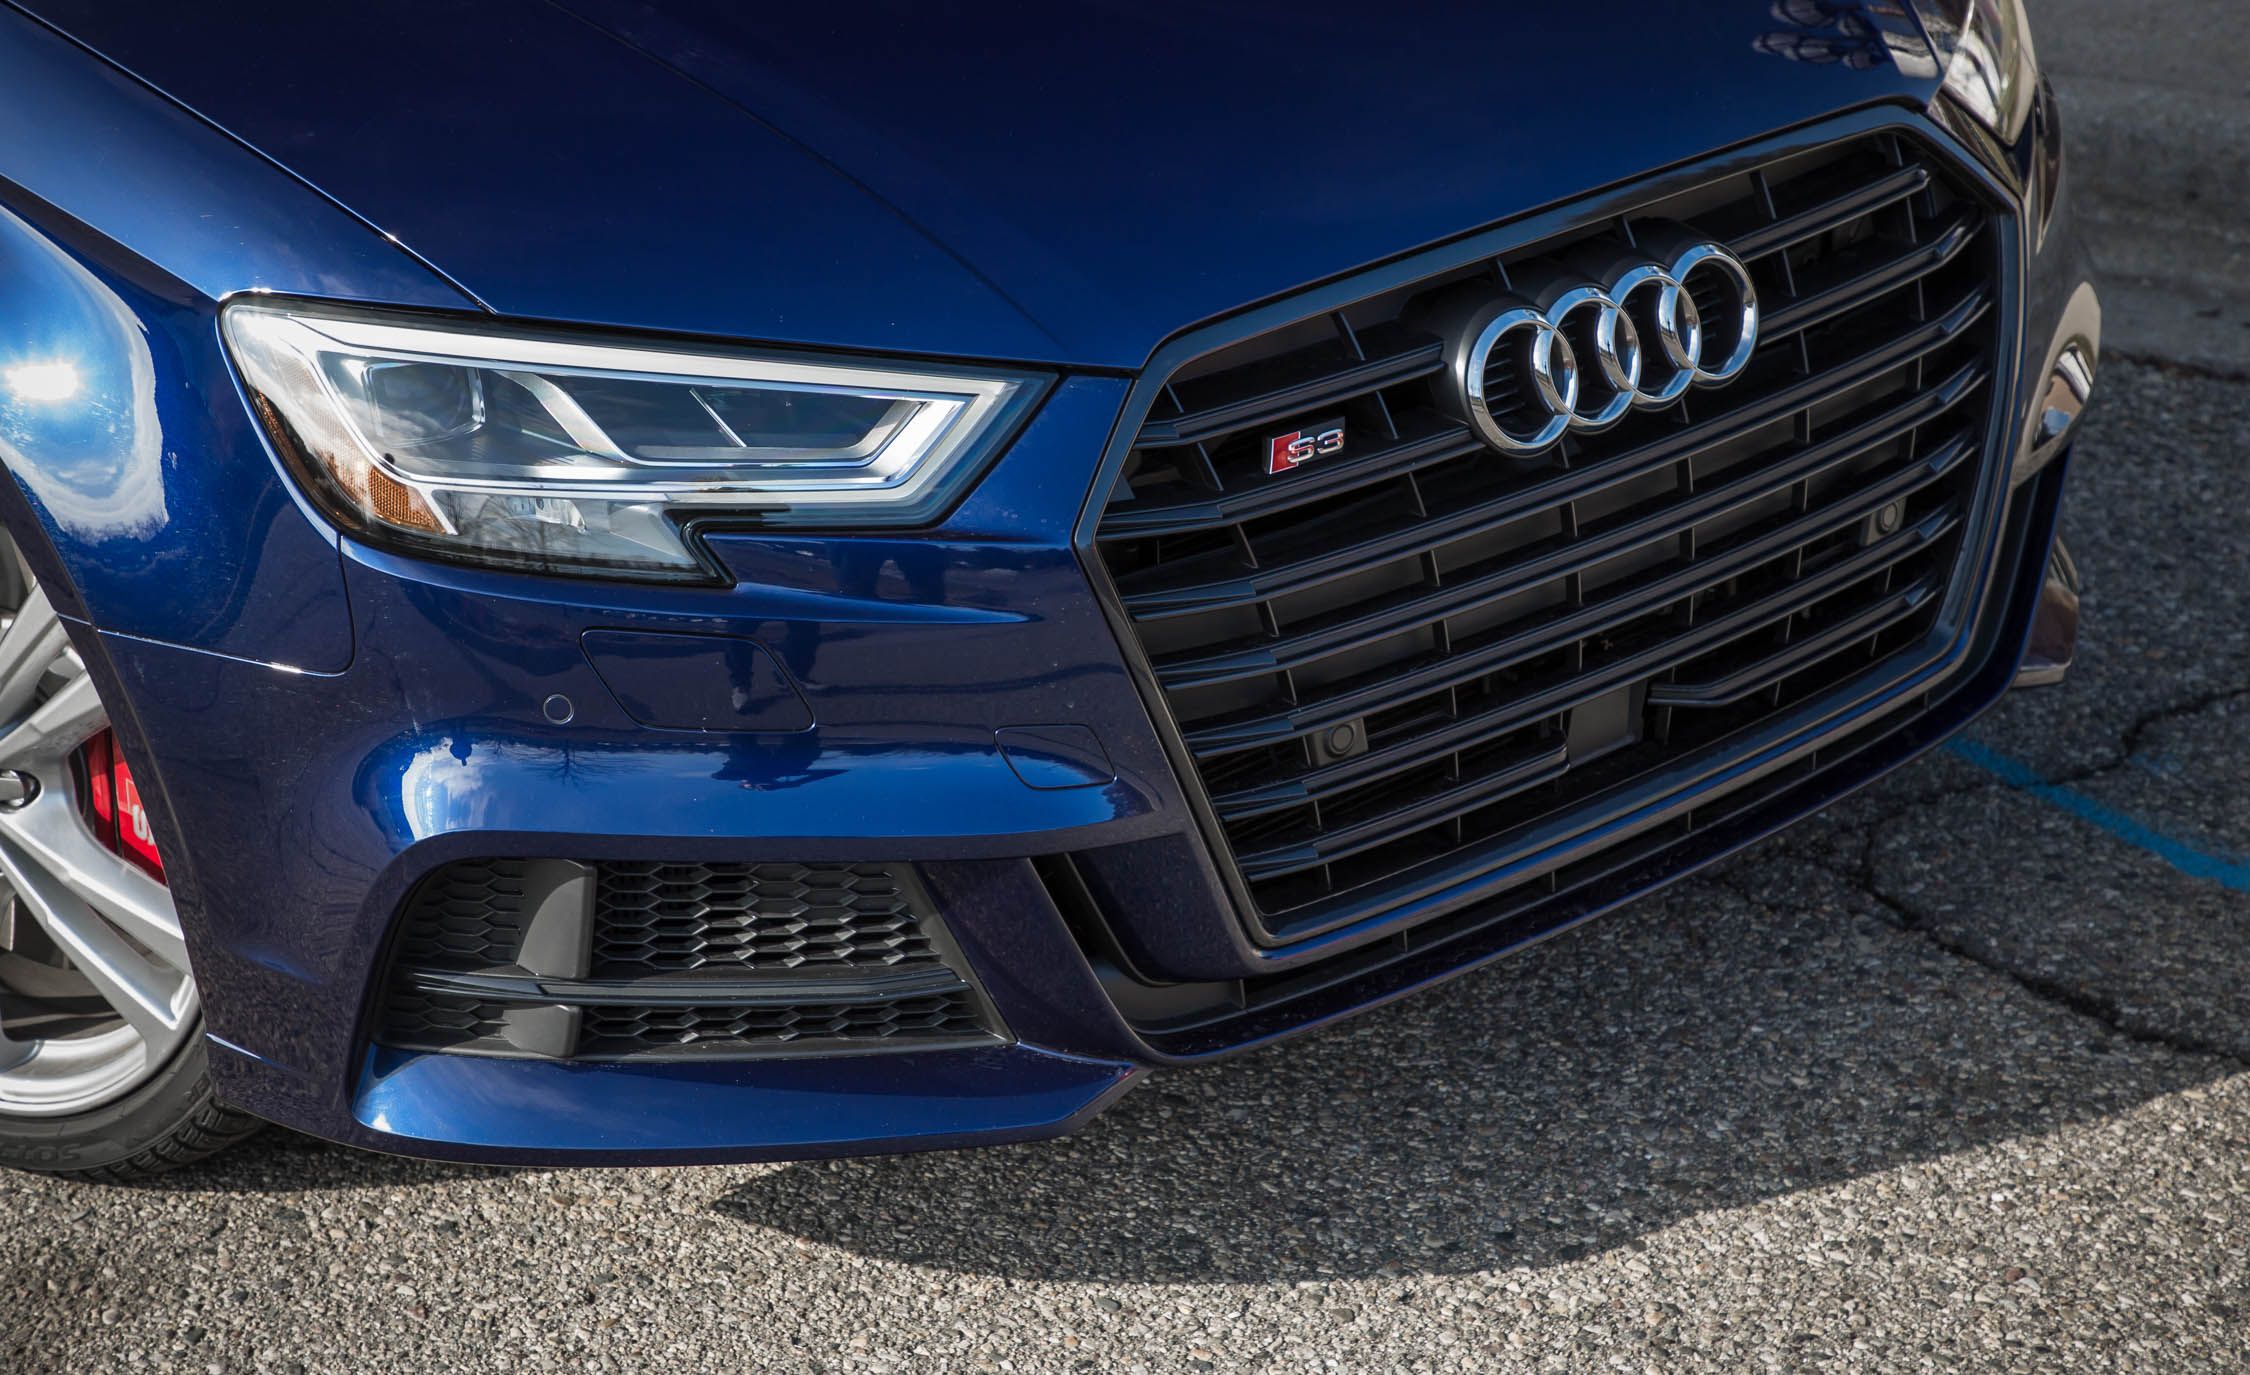 2017 Audi S3 Exterior View Front Bumper And Headlight (View 46 of 50)